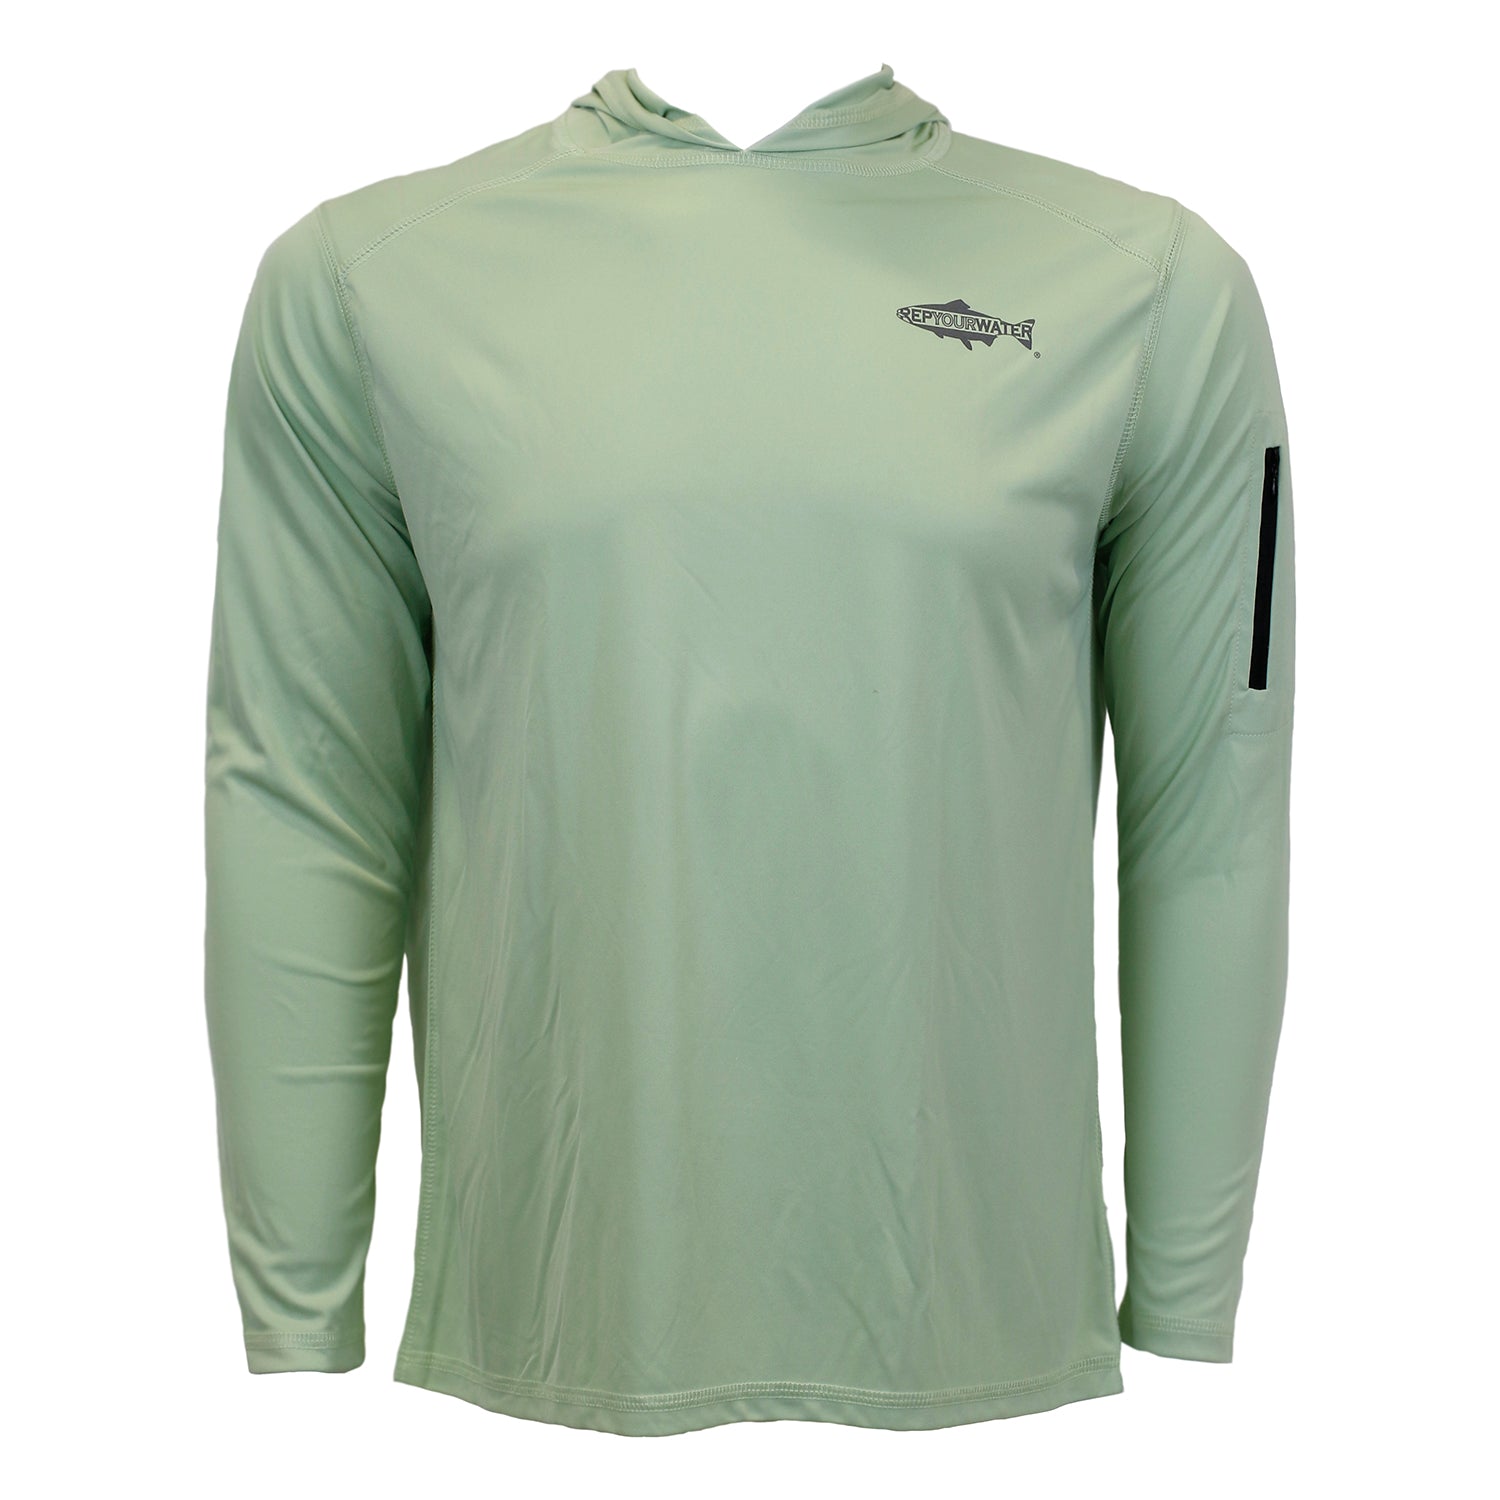 A long sleeved sun shirt, light green with a repyourwater logo on the front left chest area